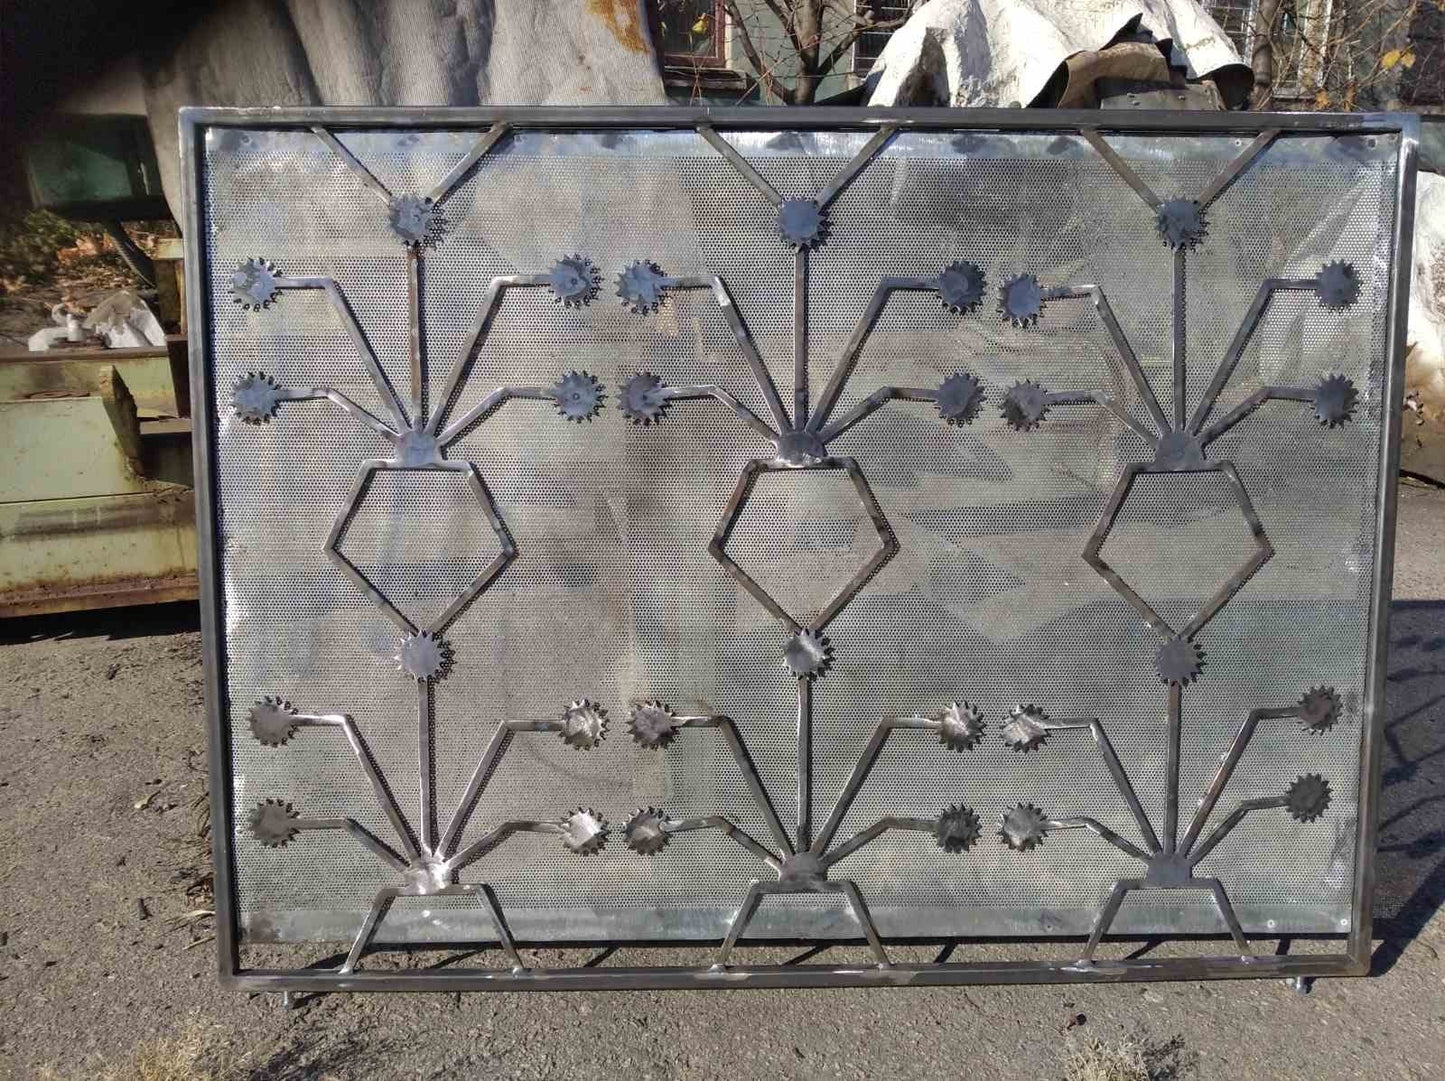 Fireplace screen, Christmas gift, iron gift, fireplace, anniversary, birthday, father, wow gift, design,blacksmith,hand hammered,hand forged